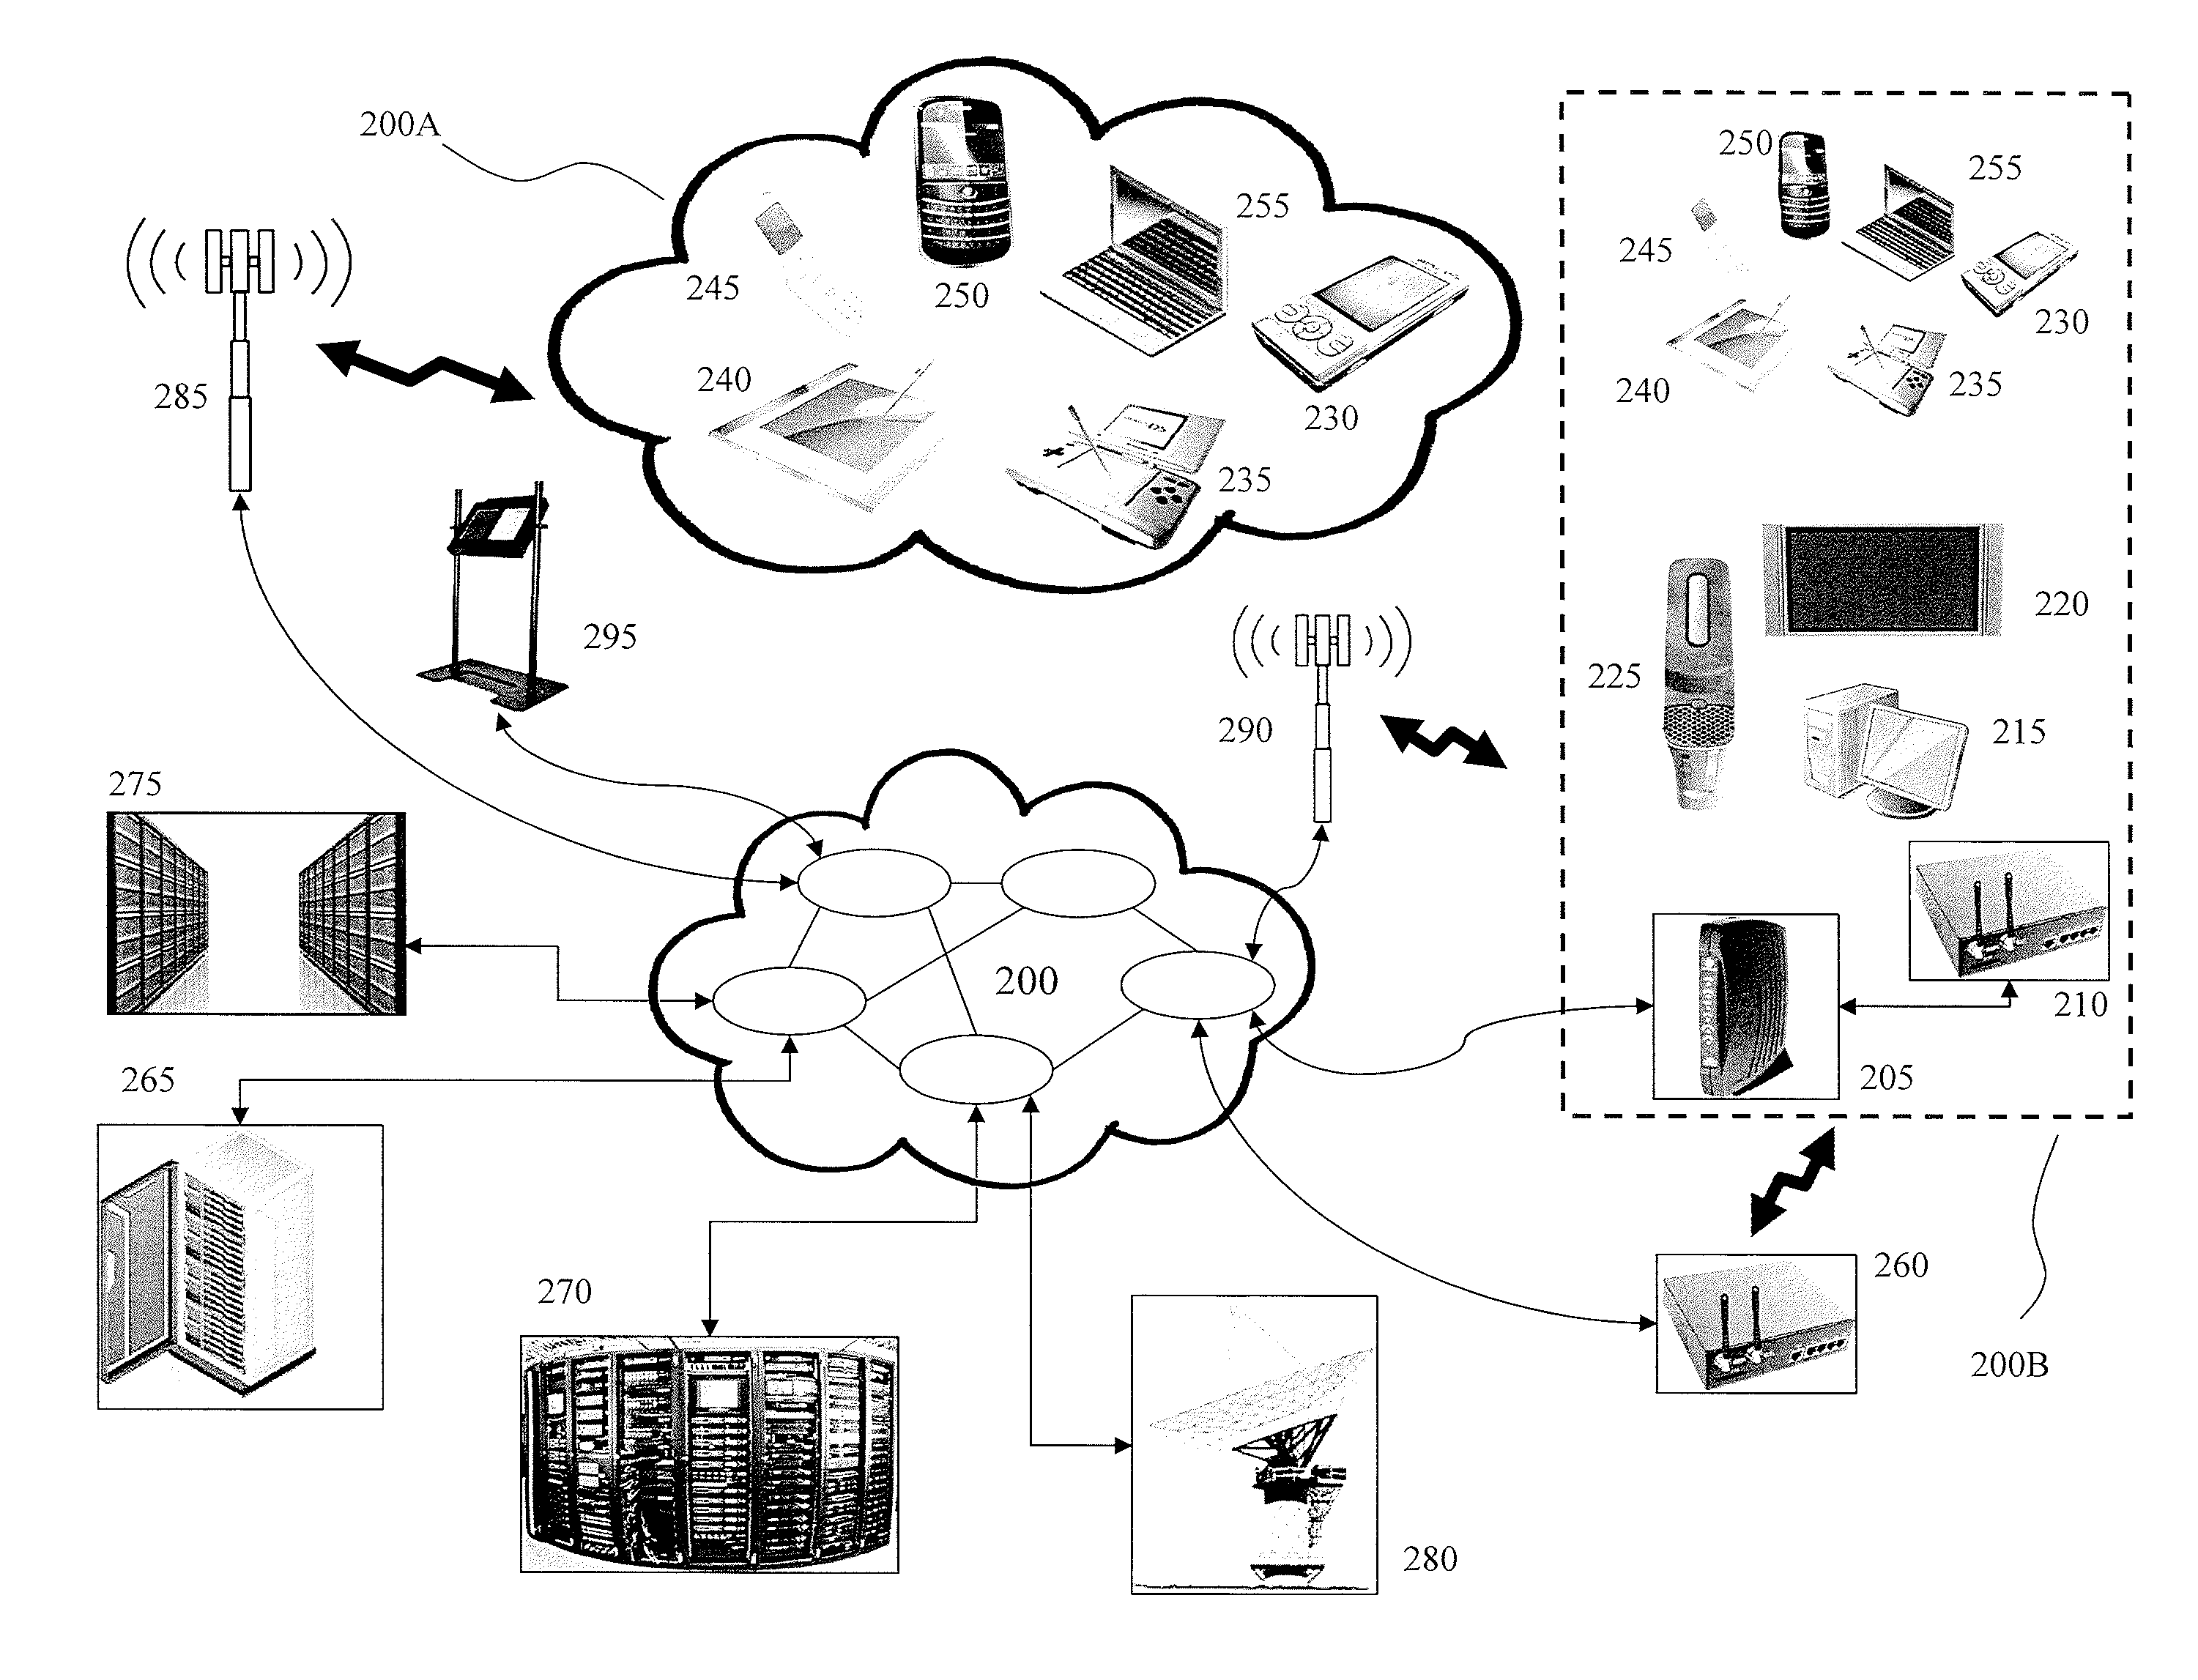 Systems and methods of automatic multimedia transfer and playback